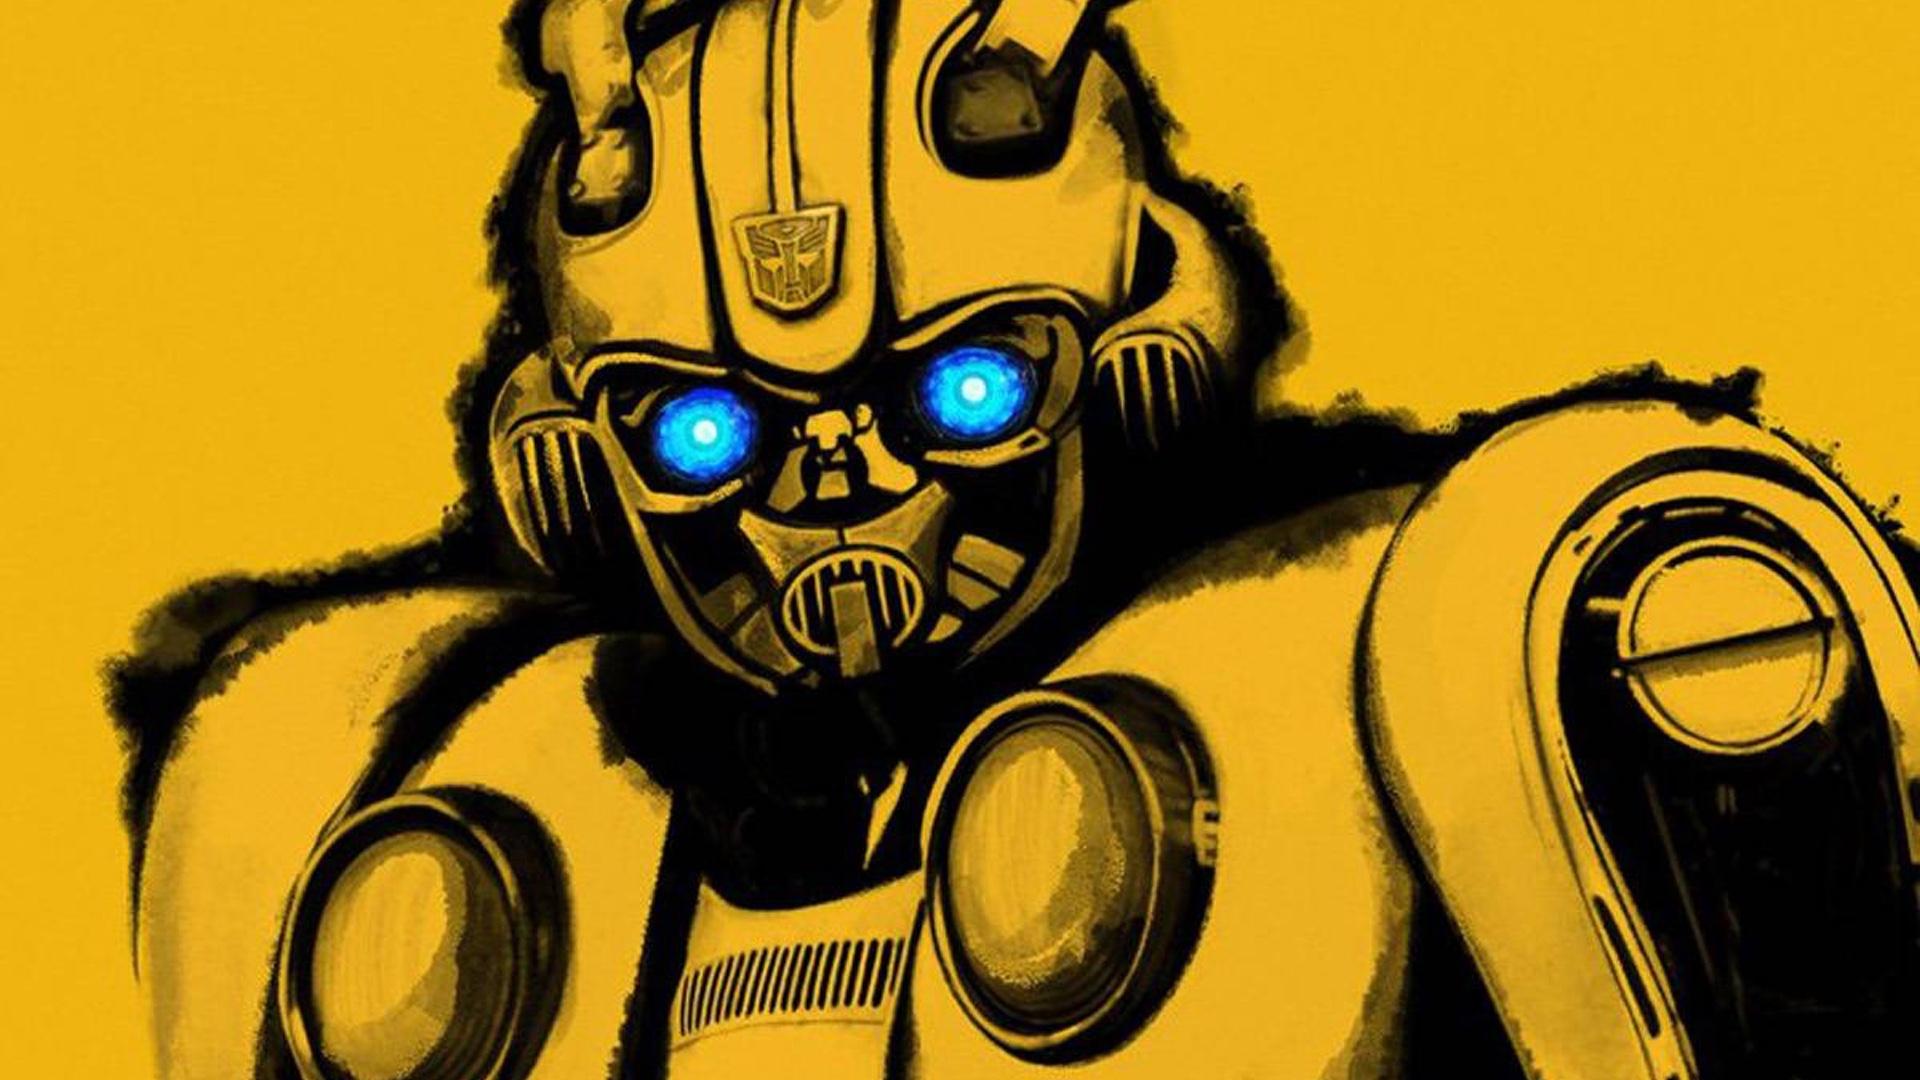 New BUMBLEBEE Poster Art and New Details on the Story, Villains